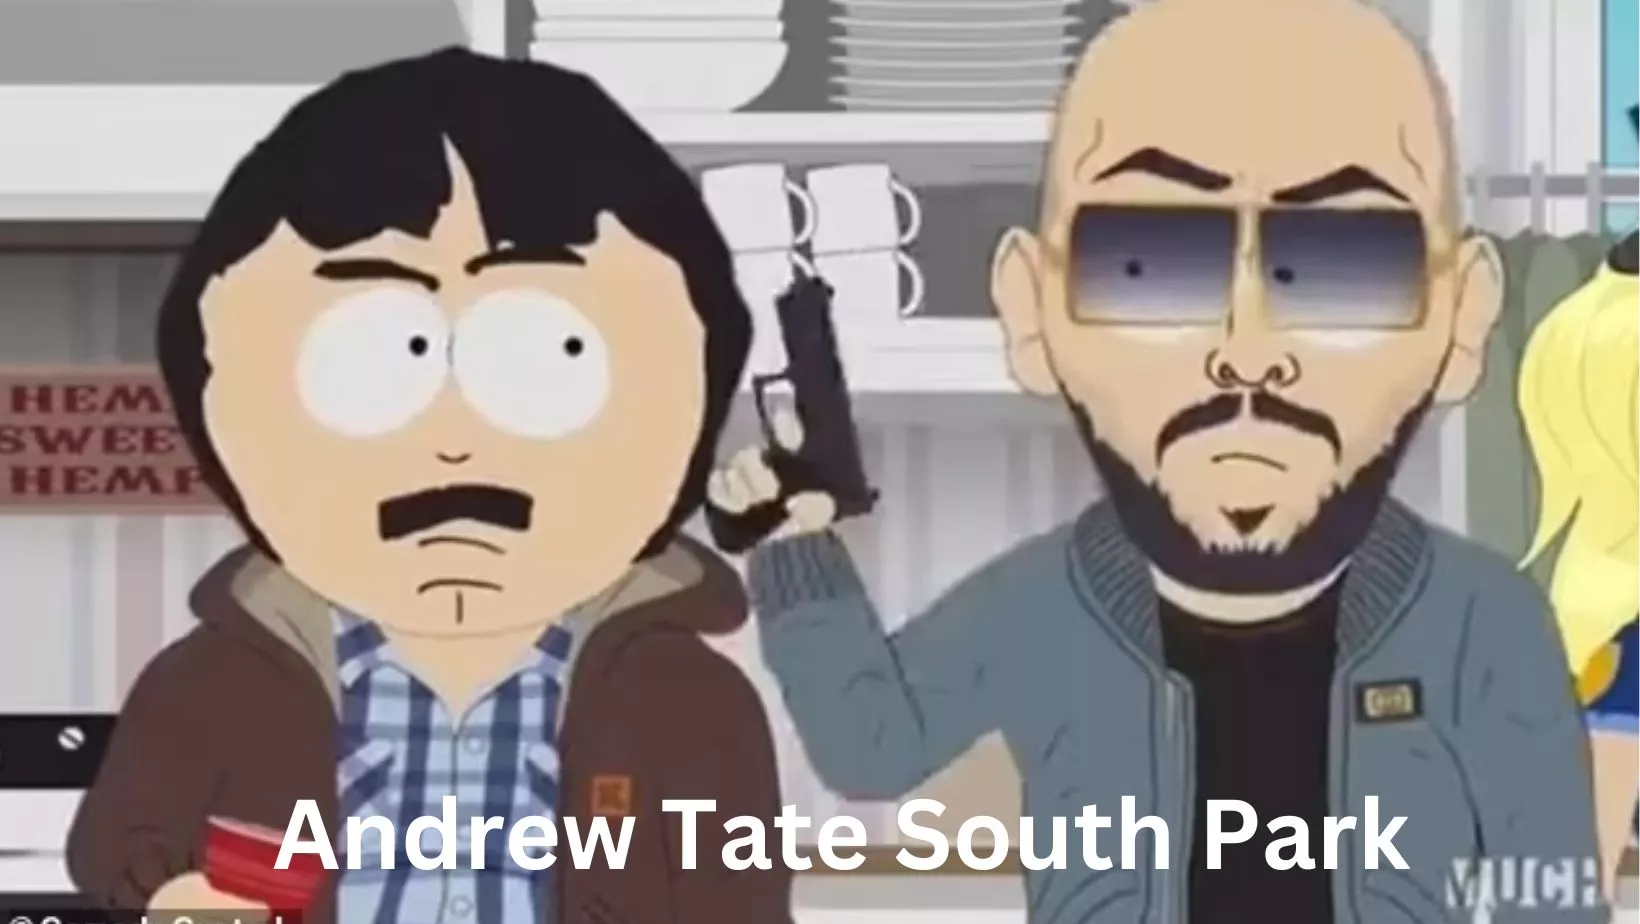 Andrew Tate South Park Take on the Controversial Kickboxer